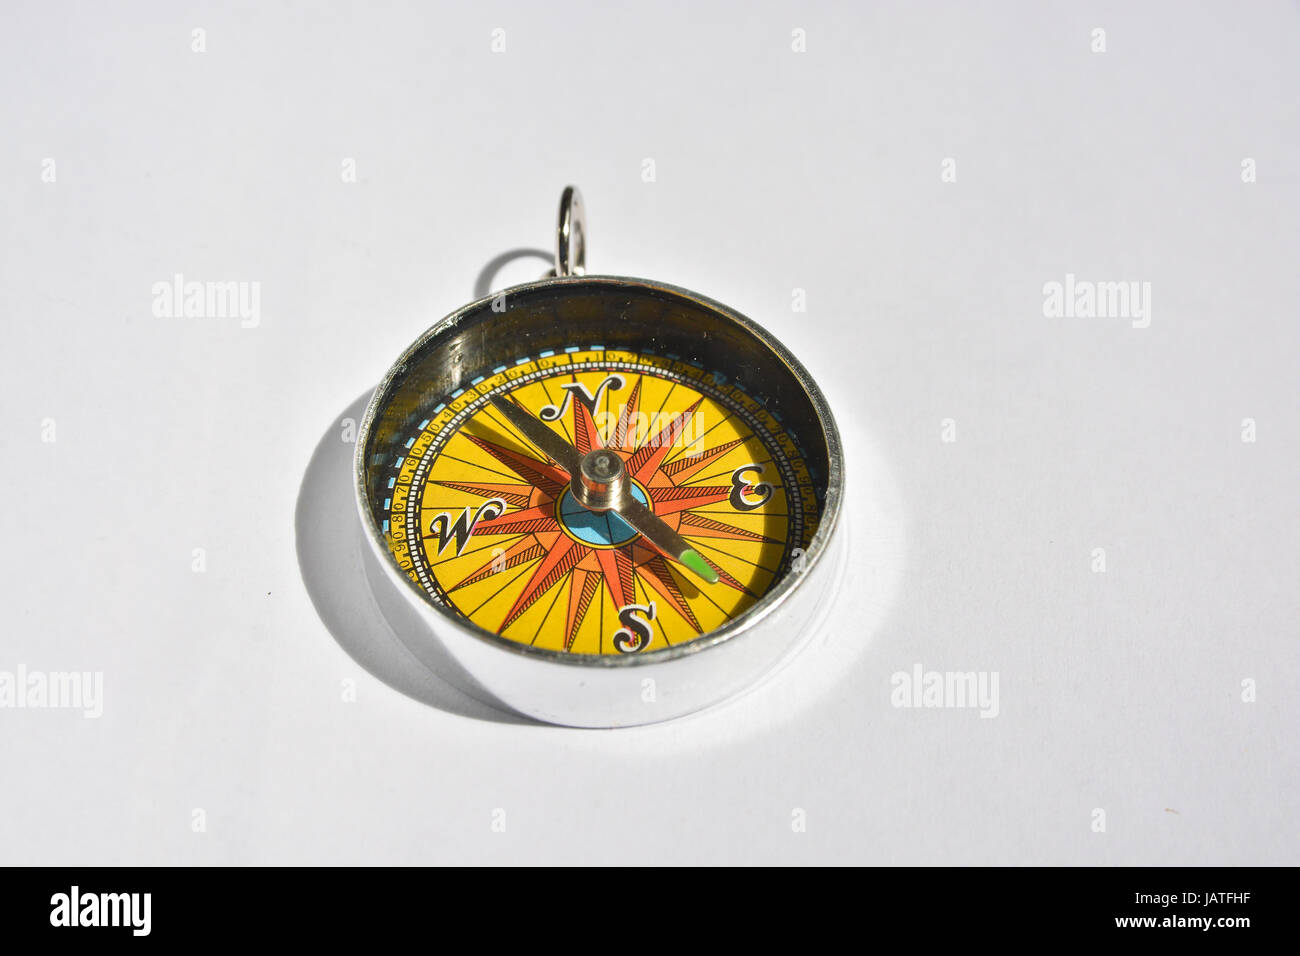 Compass. A reliable navigation tool on a white background. Stock Photo